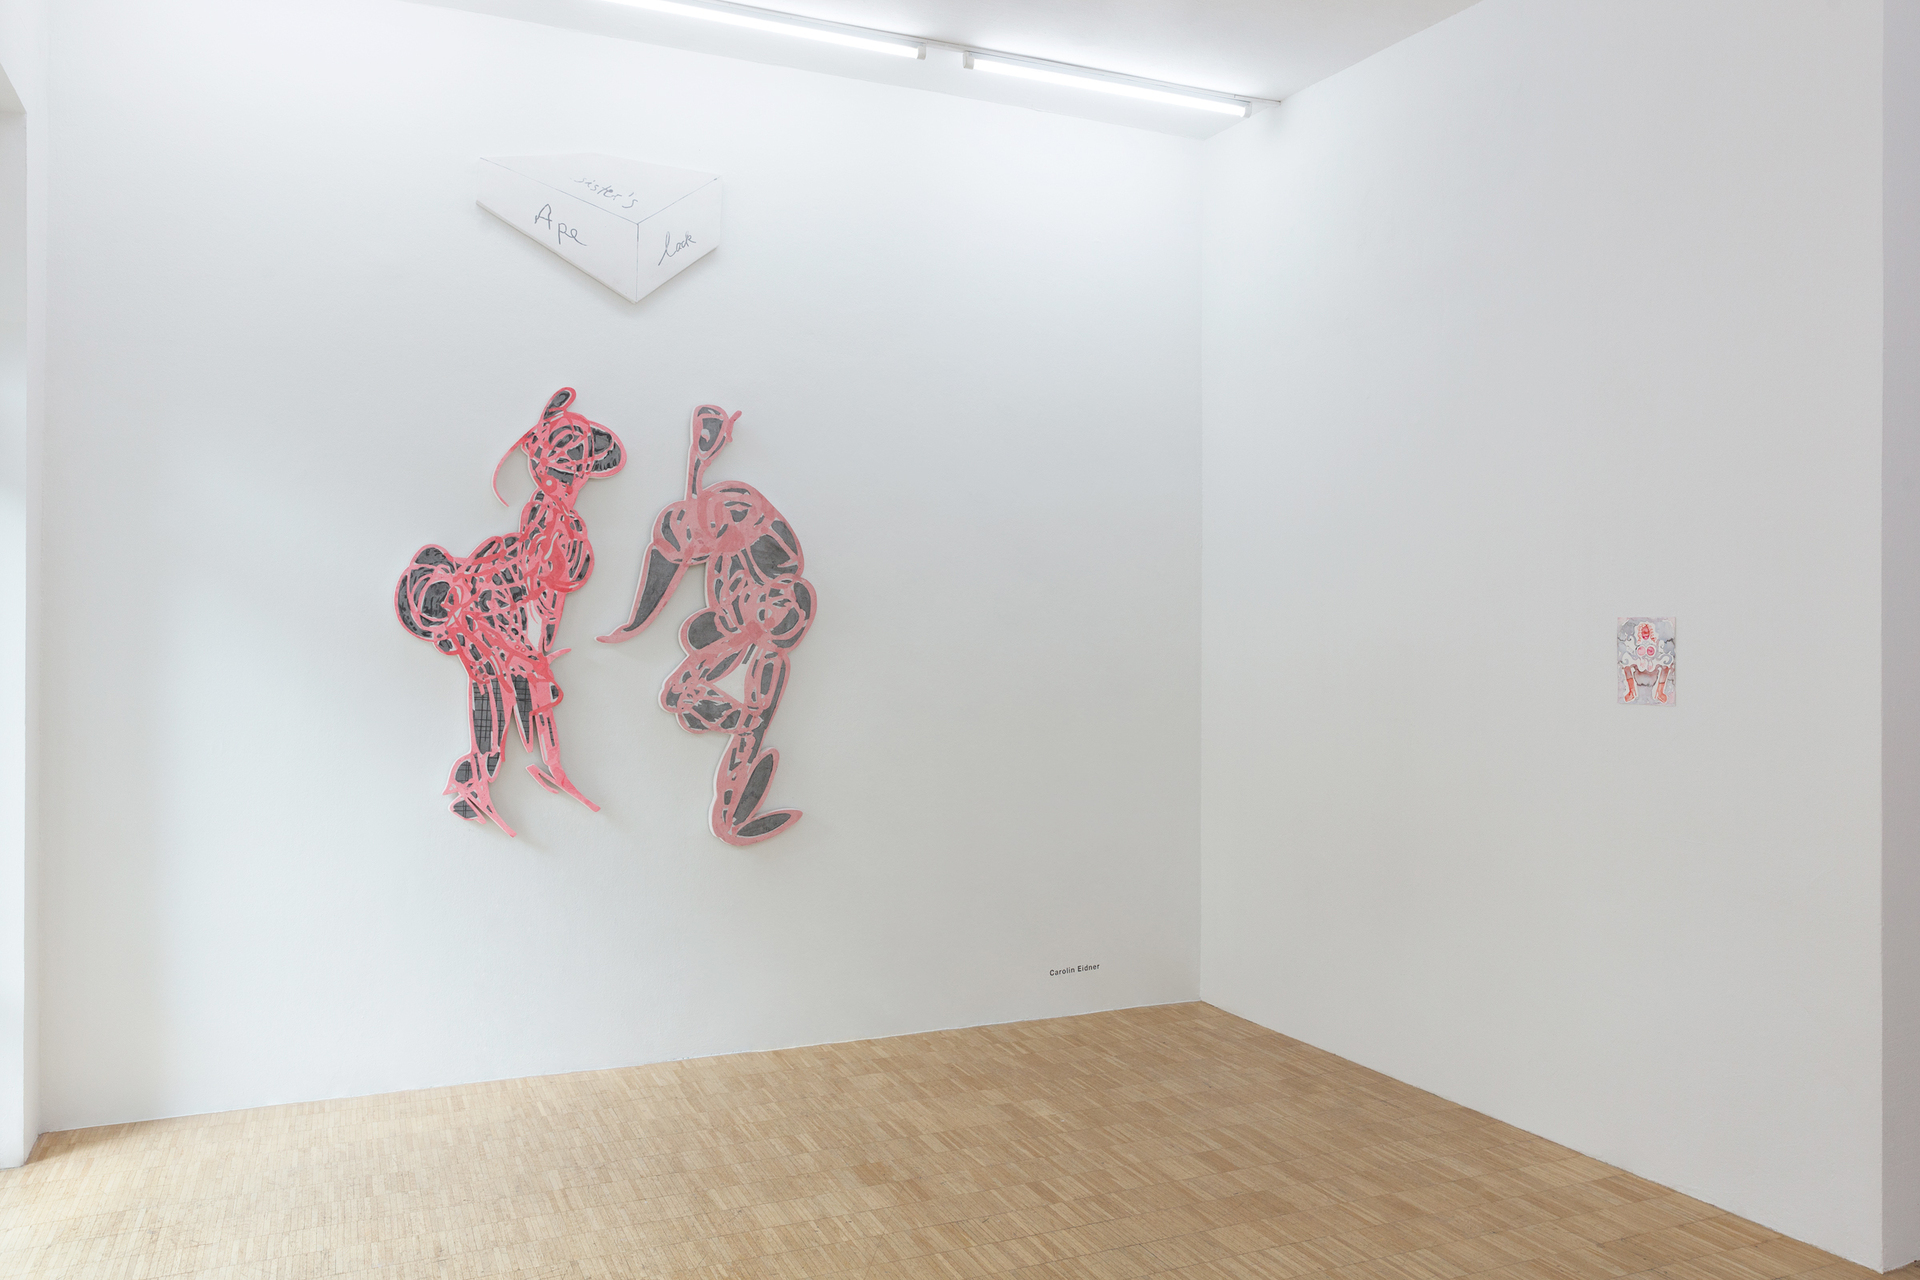 Exhibition view, Carolin Eidner (on the left), 'Sister's Ape Lack', three pieces on the wall, each pigmented plaster on wood, styrofoam ; Susie Green (on the right), 'Susie's Party' (detail), 2021